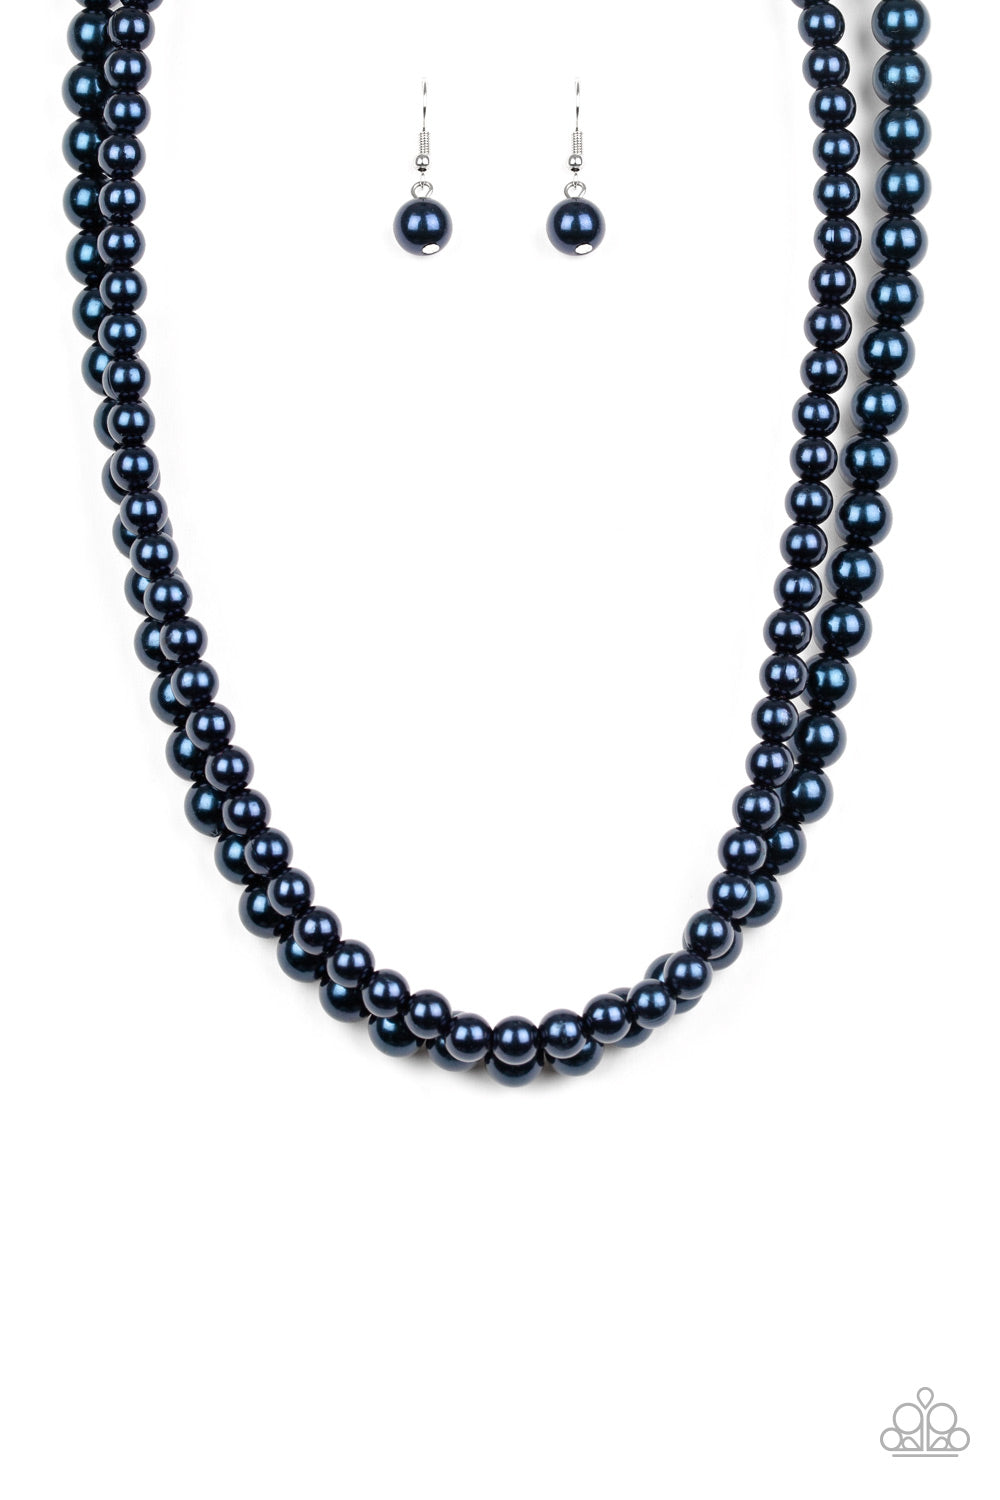 WOMAN OF THE CENTURY BLUE-NECKLACE